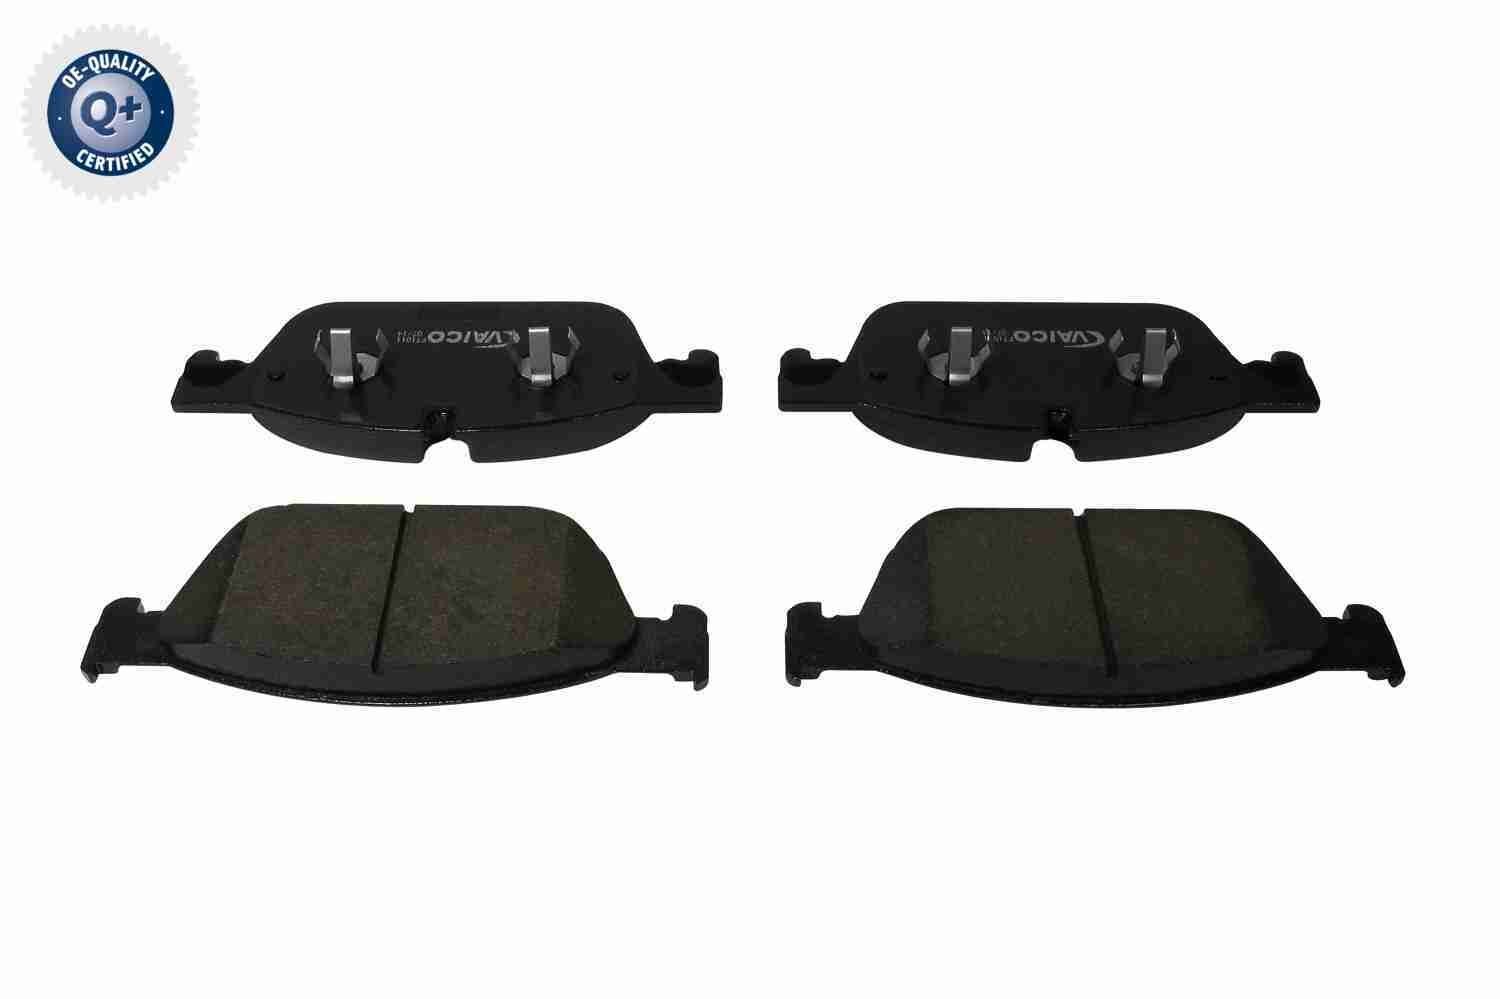 V30-2137 VAICO Brake pad set MERCEDES-BENZ Q+, original equipment manufacturer quality, Front Axle, excl. wear warning contact, prepared for wear indicator